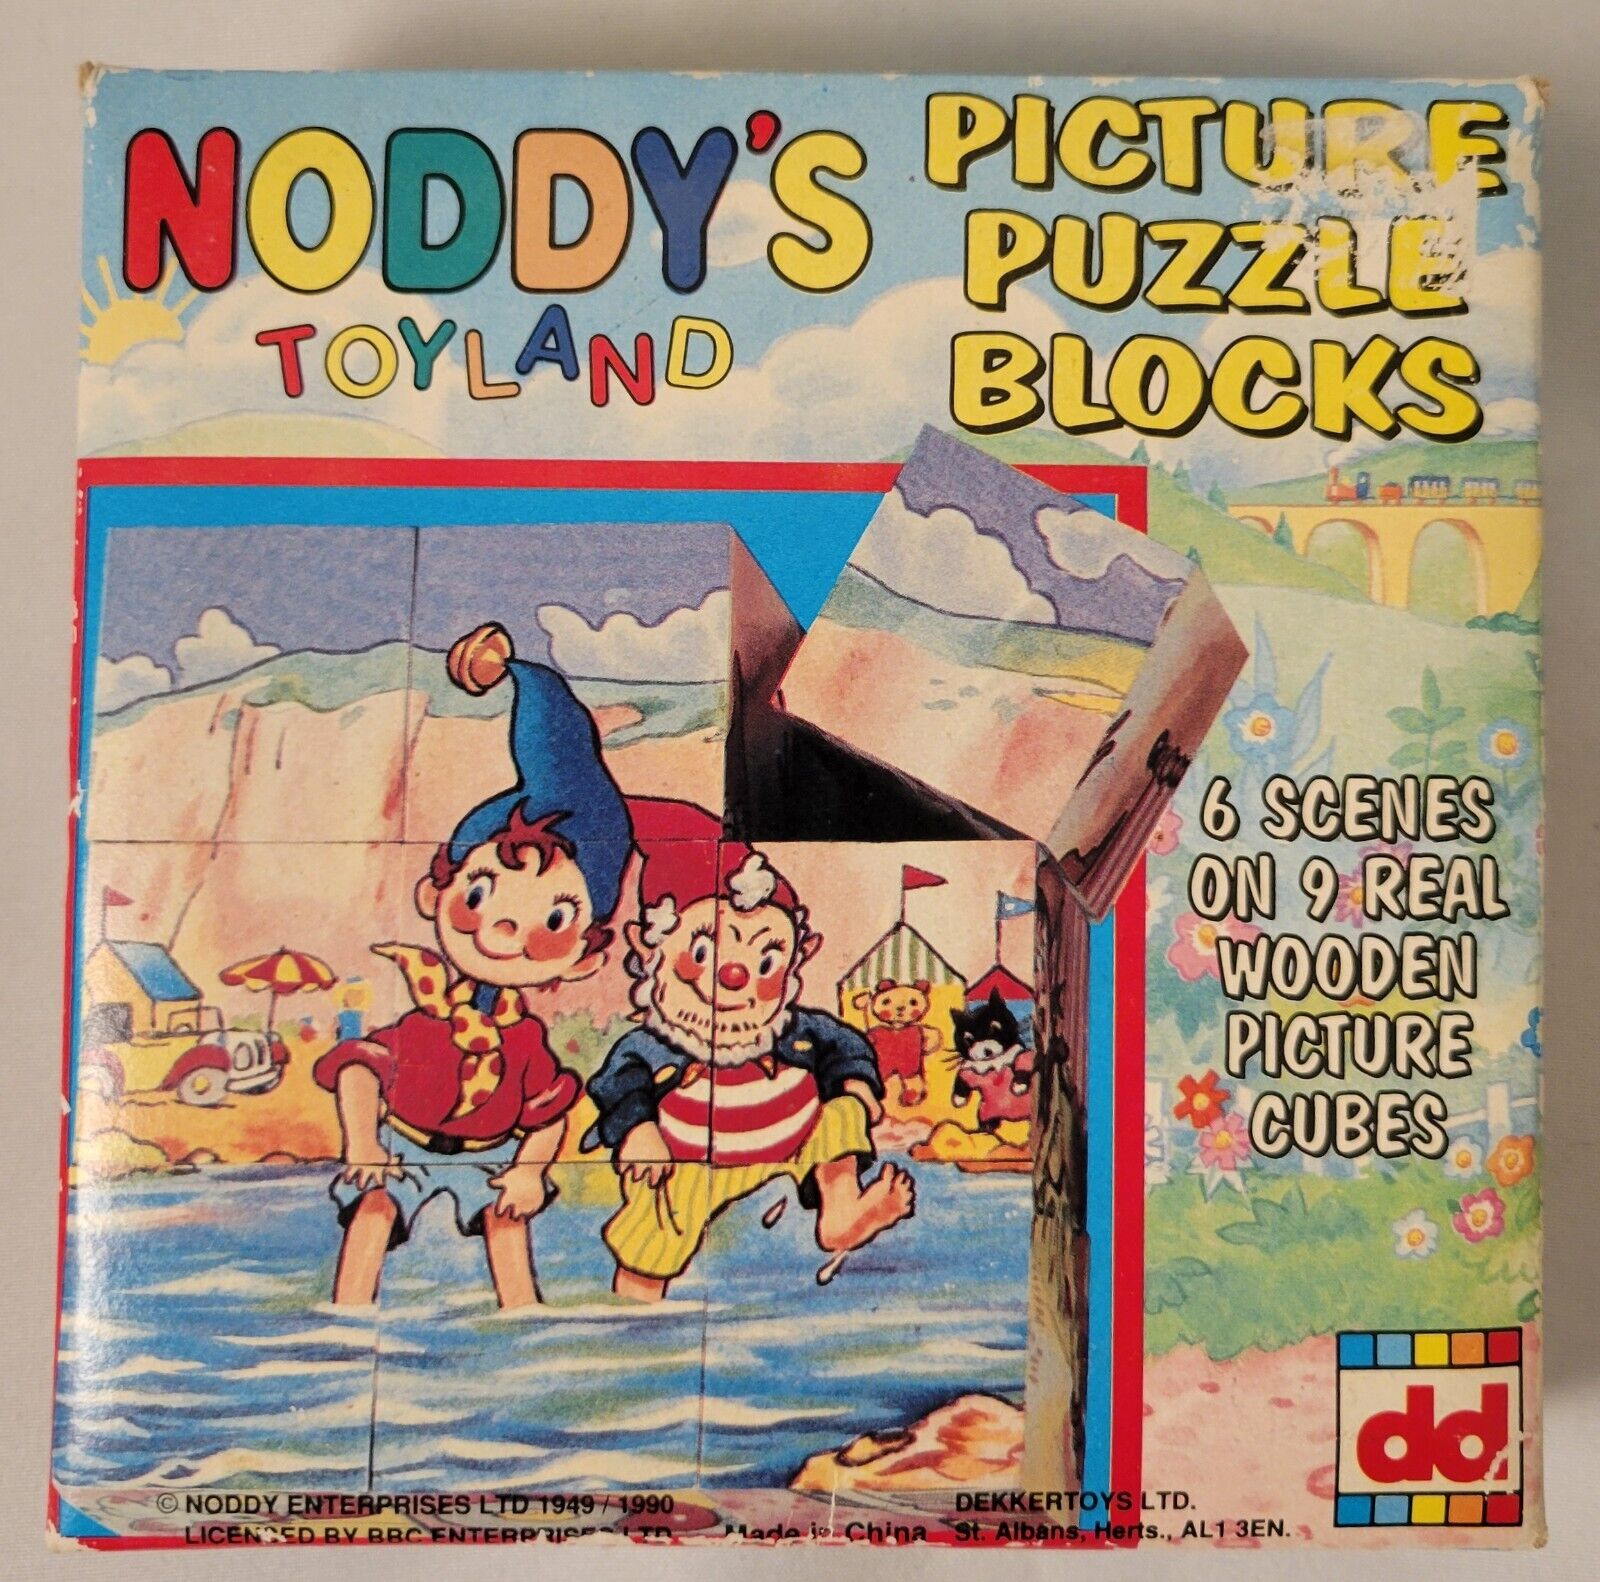 Noddy’s Toyland Picture Puzzle Blocks - Six Scenes on Nine Wooden Picture Cubes